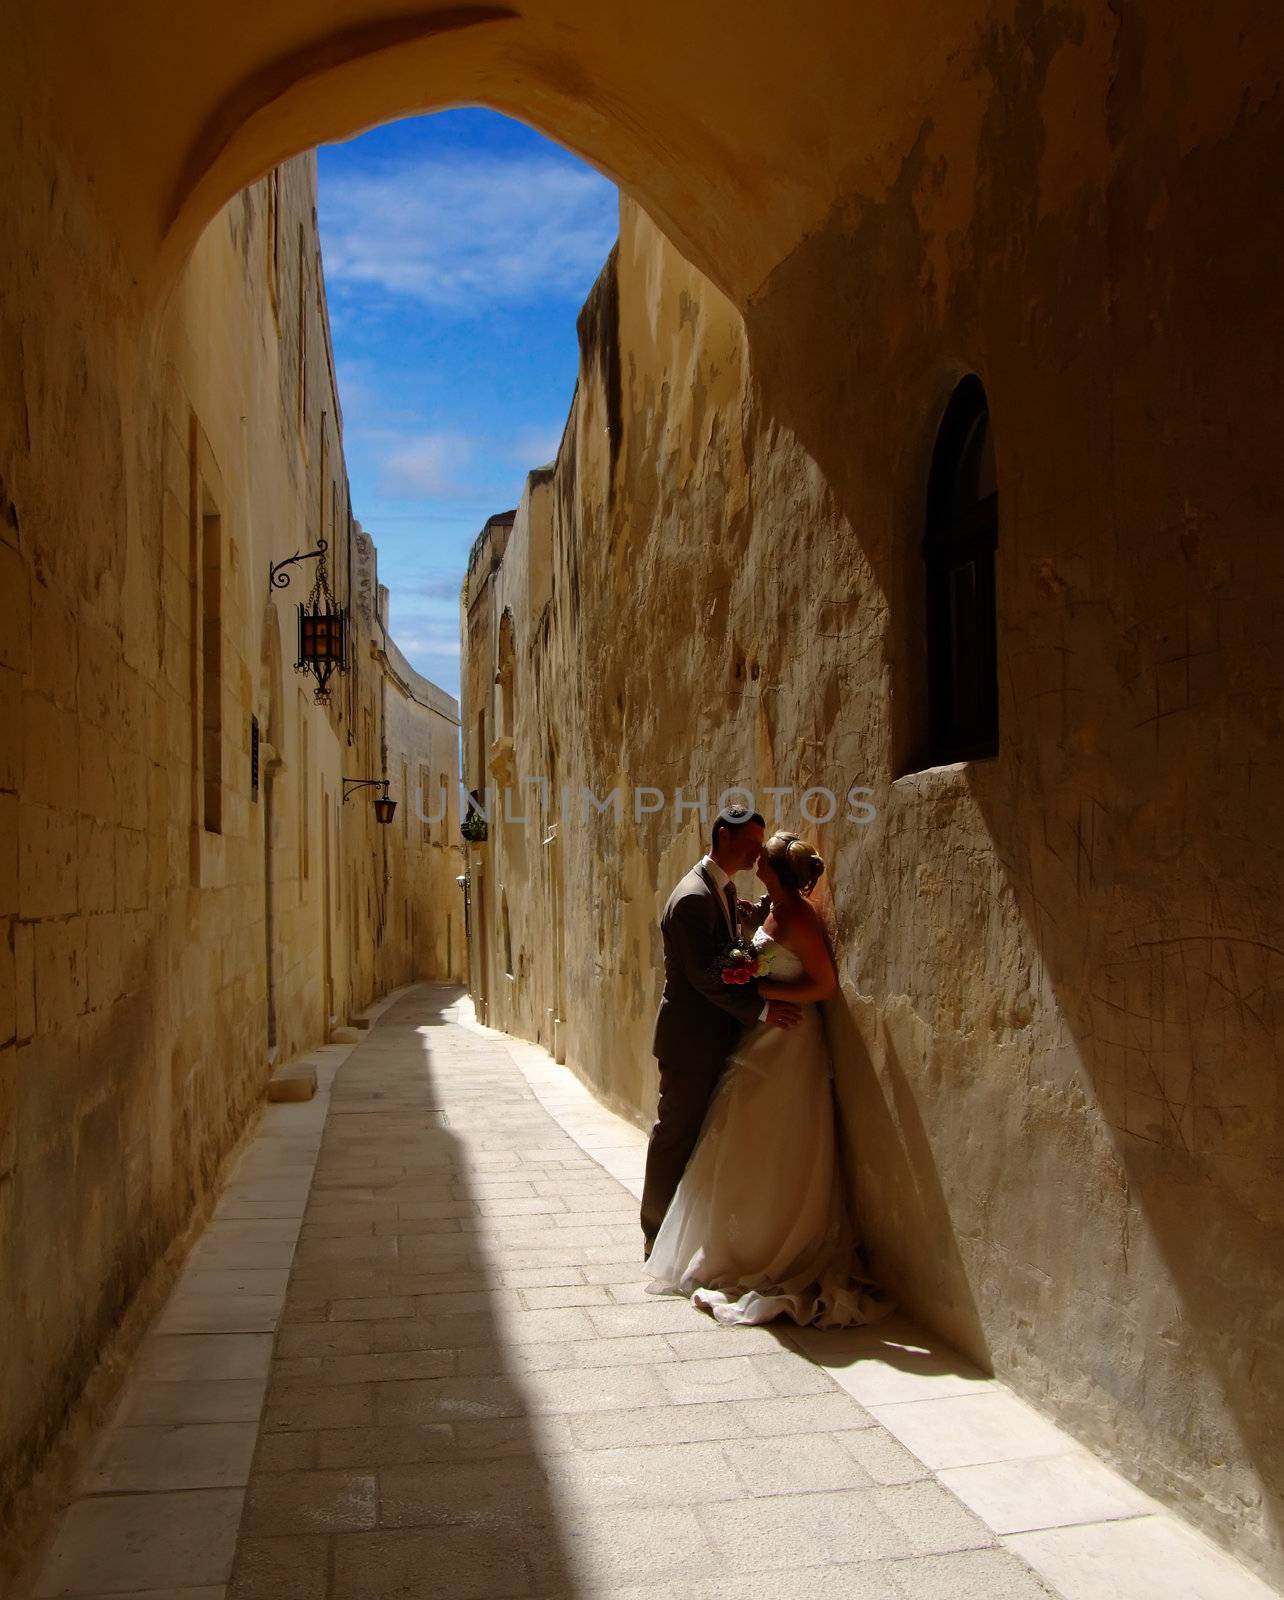 Archway Kiss by PhotoWorks